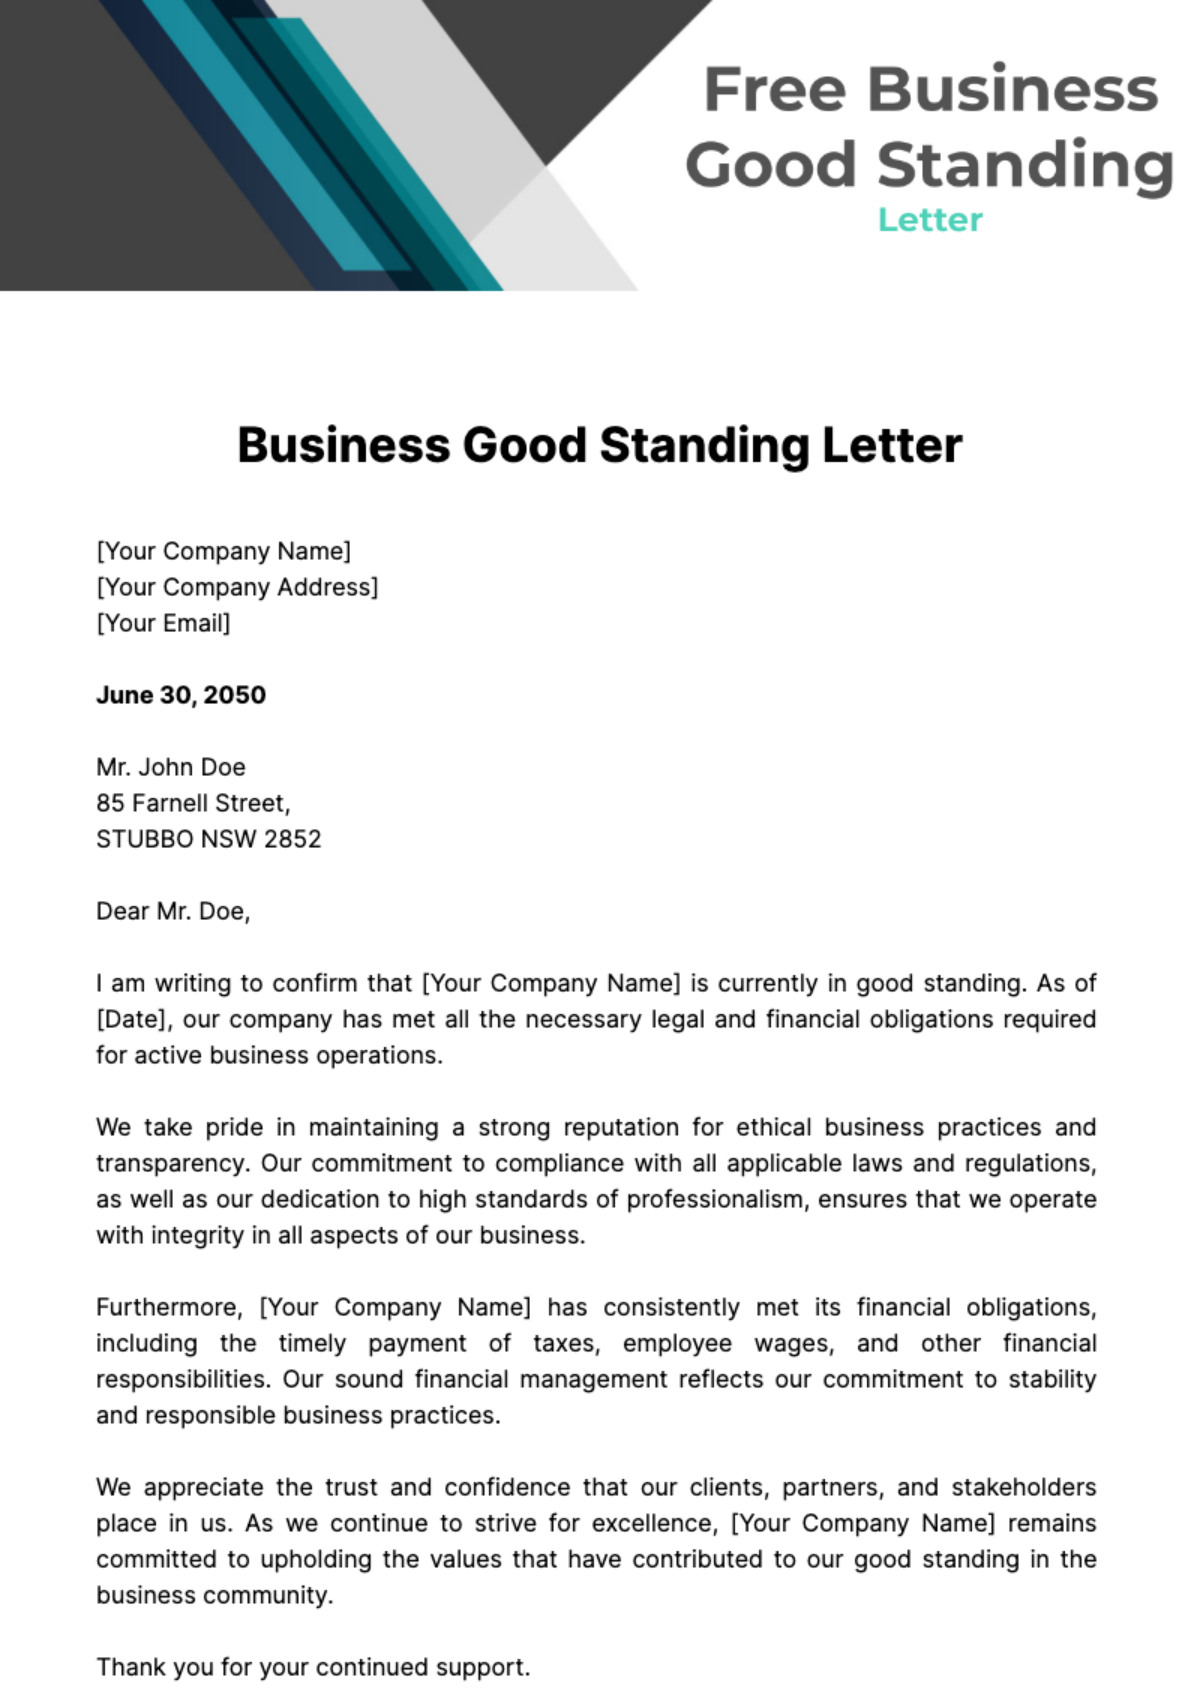 Free Business Good Standing Letter Template